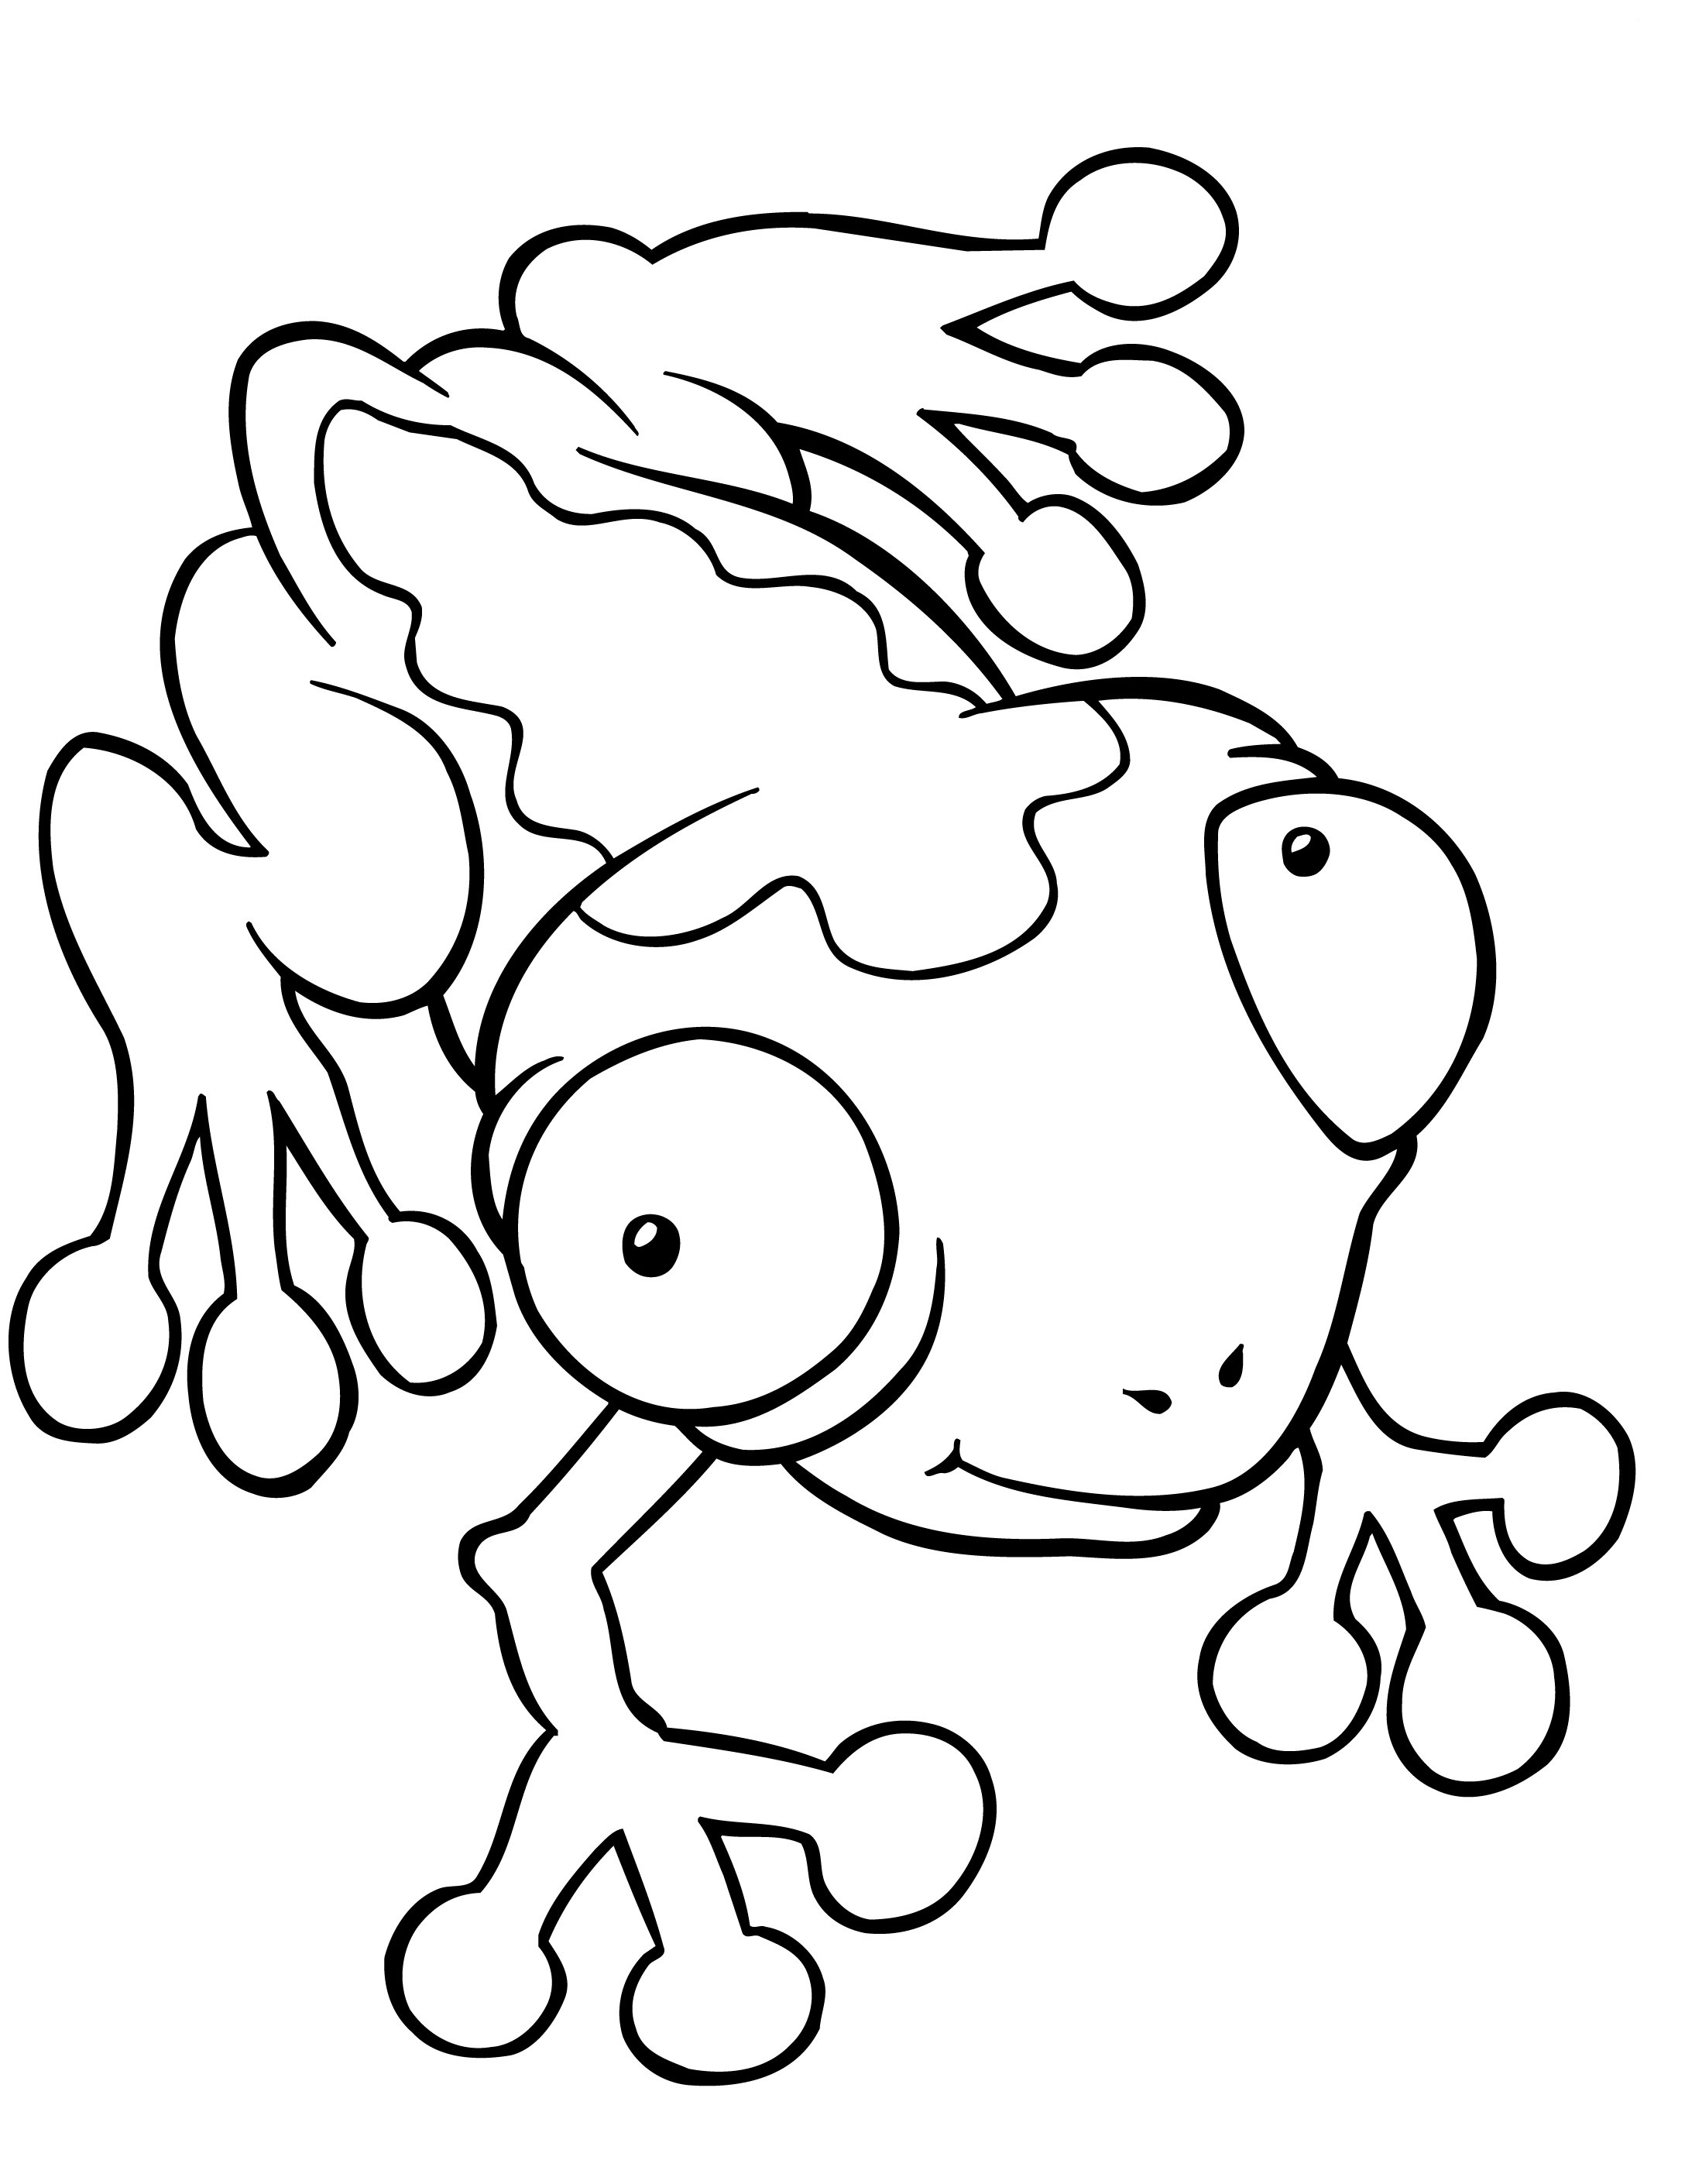 Download Free Printable Frog Coloring Pages For Kids